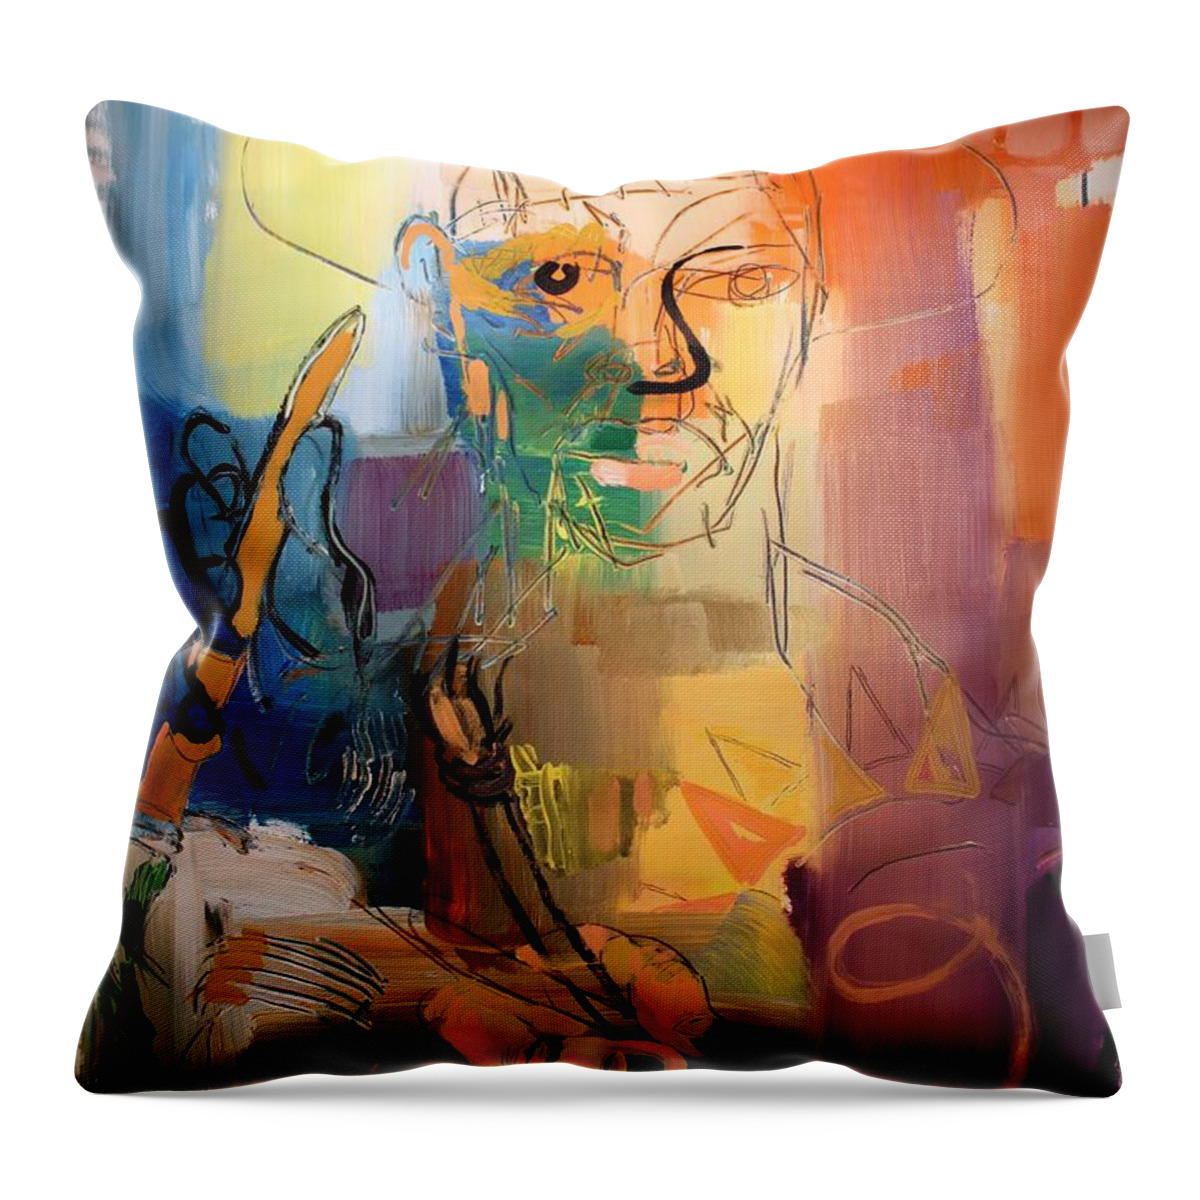 Expressive Throw Pillow featuring the painting Processing by Aort Reed